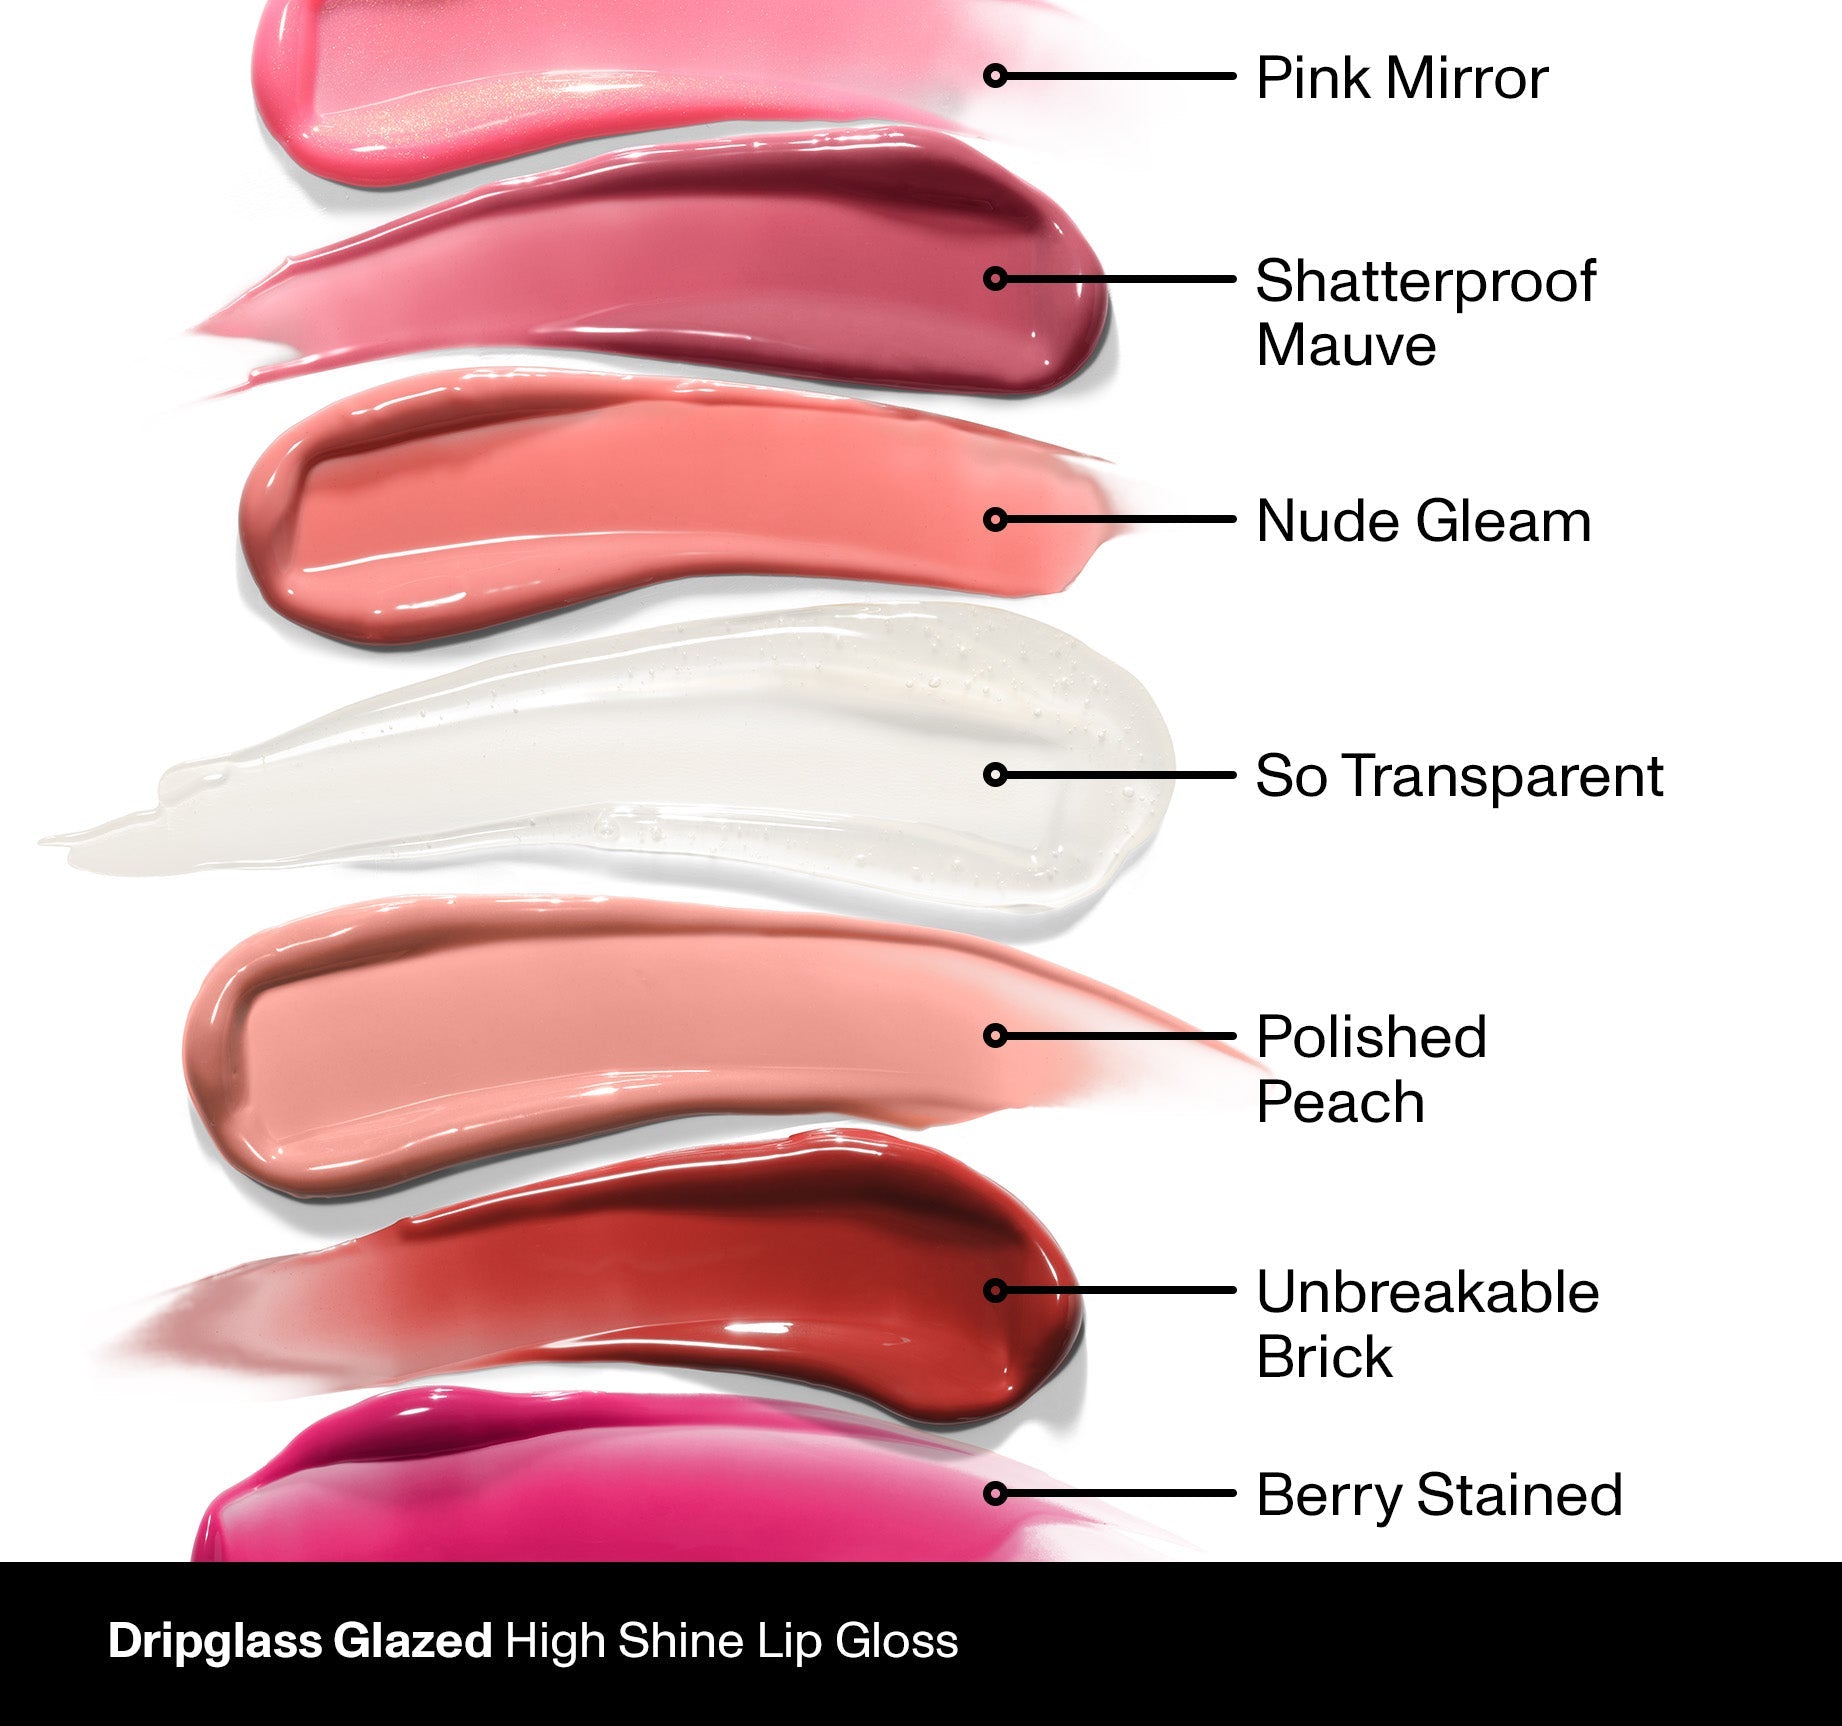 Dripglass Glazed High Shine Lip Gloss - Berry Stained - Image 7